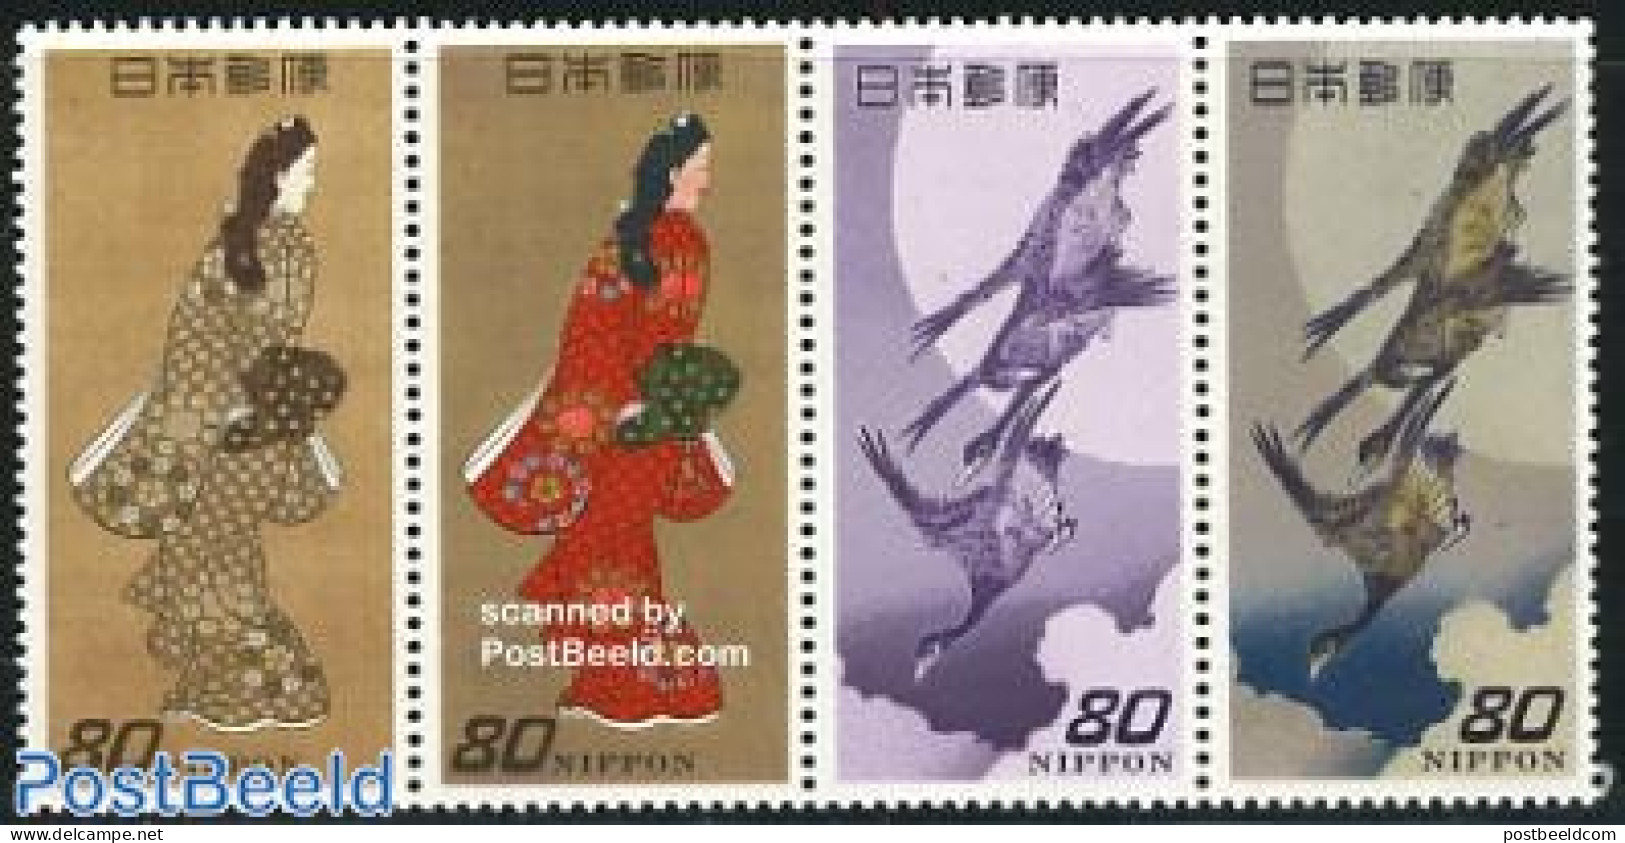 Japan 1996 Stamp History 4v [:::], Mint NH, Nature - Birds - Stamps On Stamps - Neufs